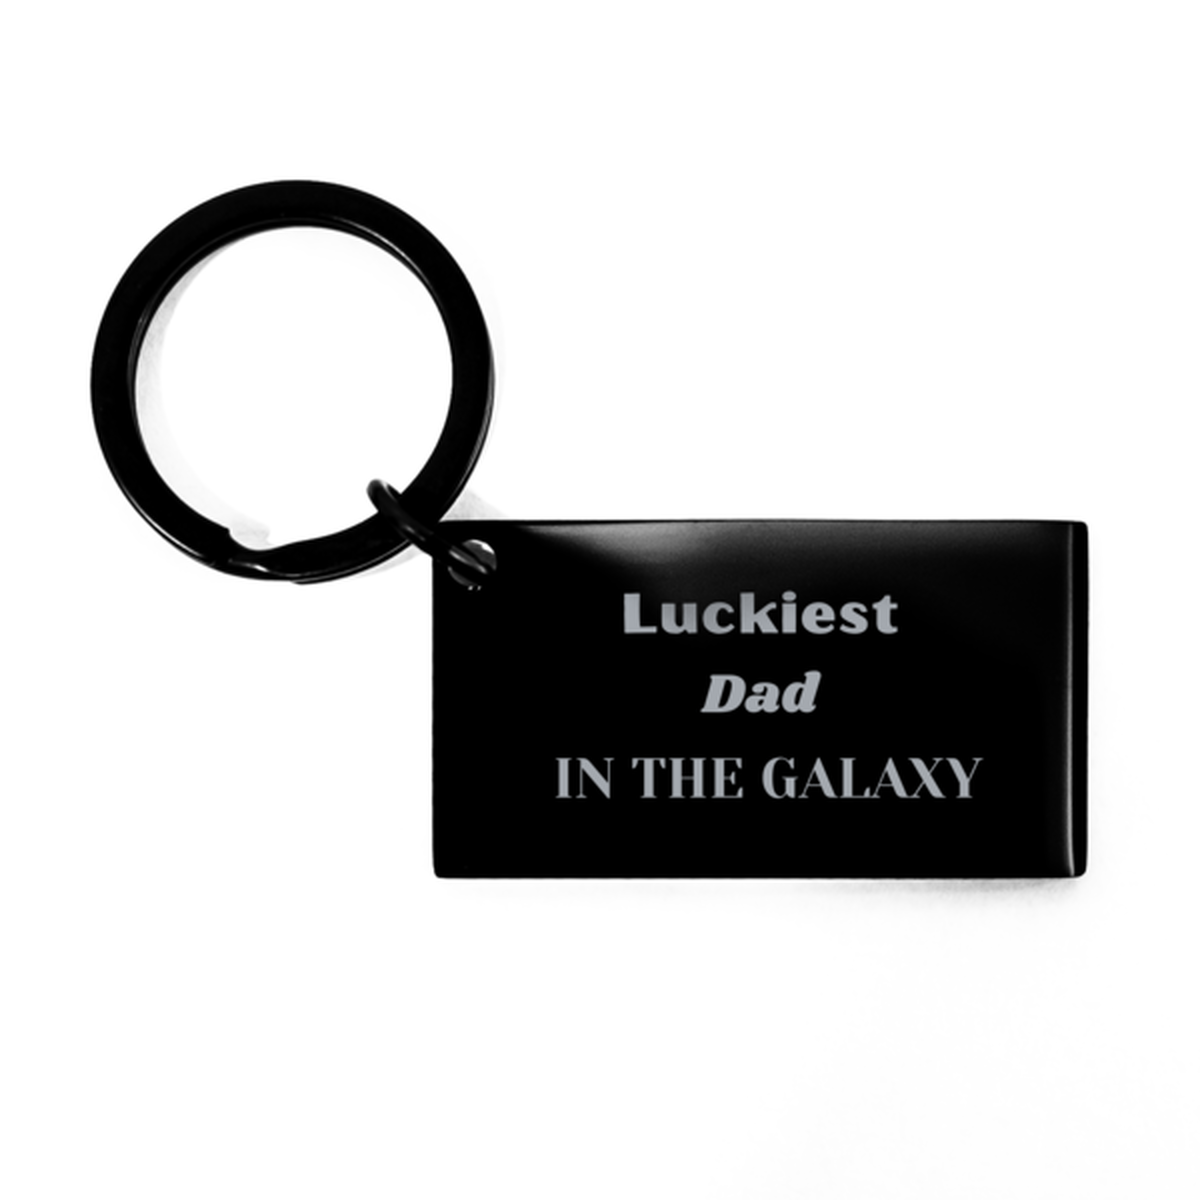 Luckiest Dad in the Galaxy, To My Dad Engraved Gifts, Christmas Dad Keychain Gifts, X-mas Birthday Unique Gifts For Dad Men Women